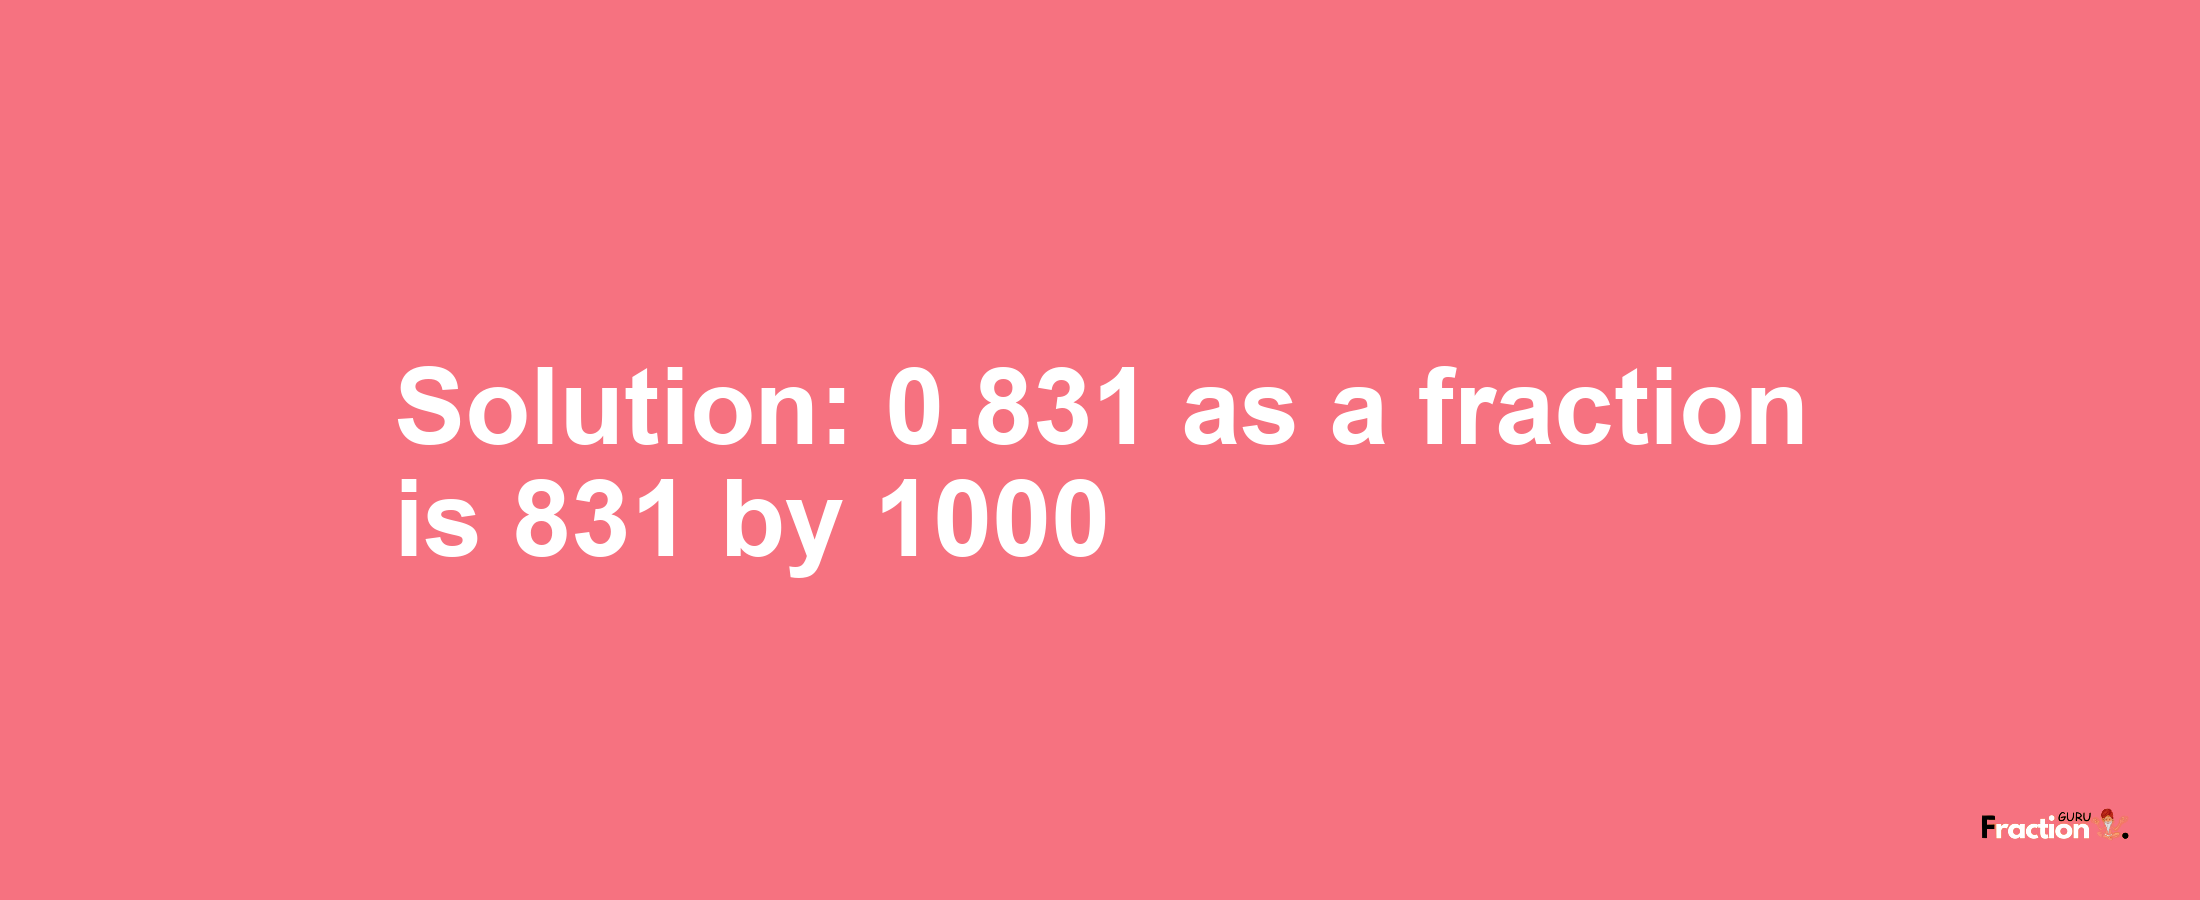 Solution:0.831 as a fraction is 831/1000